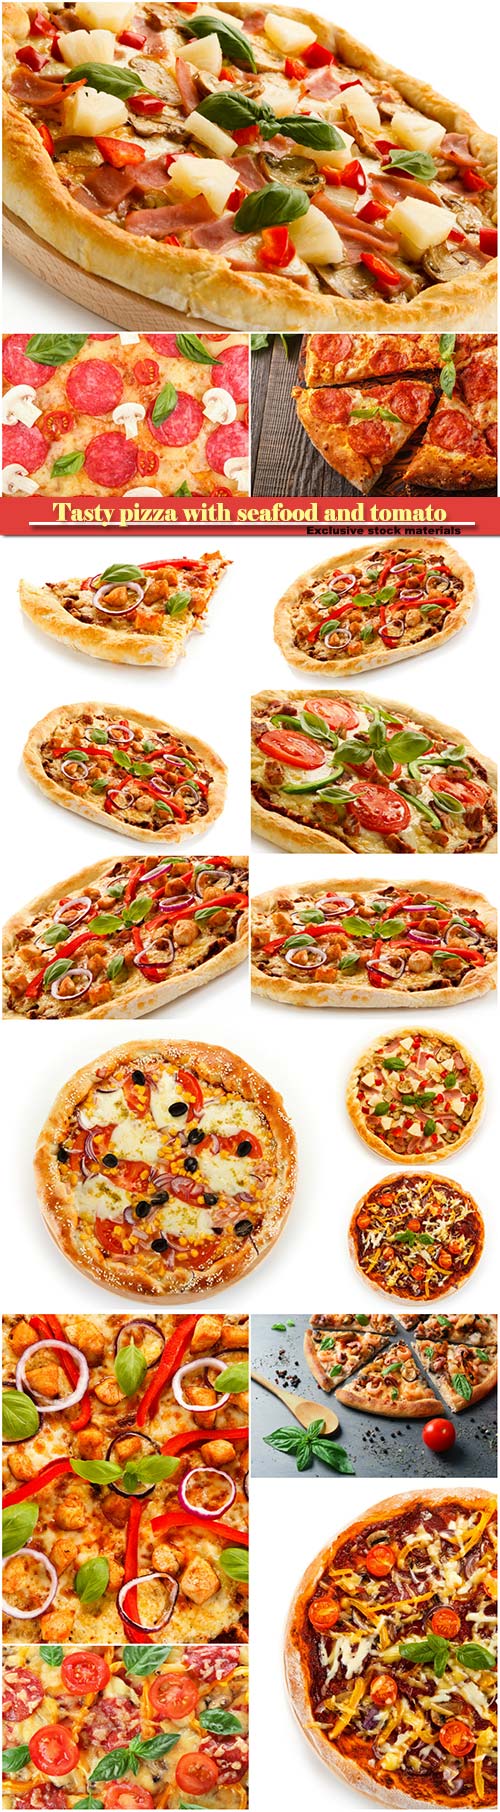 Tasty pizza with seafood and tomato, mushrooms and salami